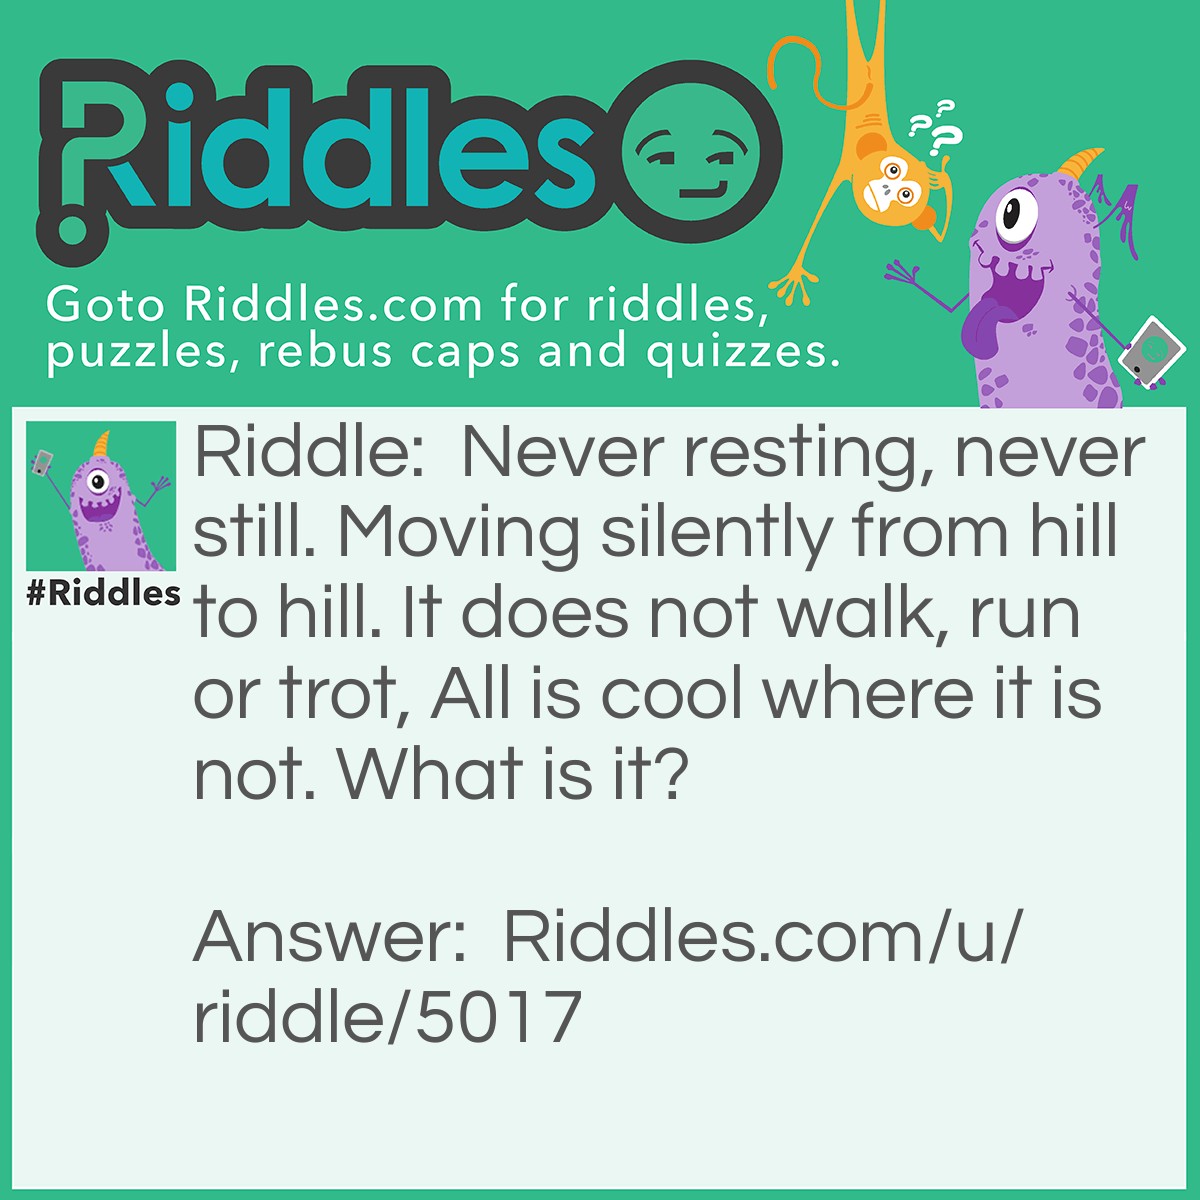 Riddle: Never resting, never still. Moving silently from hill to hill. It does not walk, run or trot, All is cool where it is not. What is it? Answer: A silent but deadly fart. I encourage you to dislike...